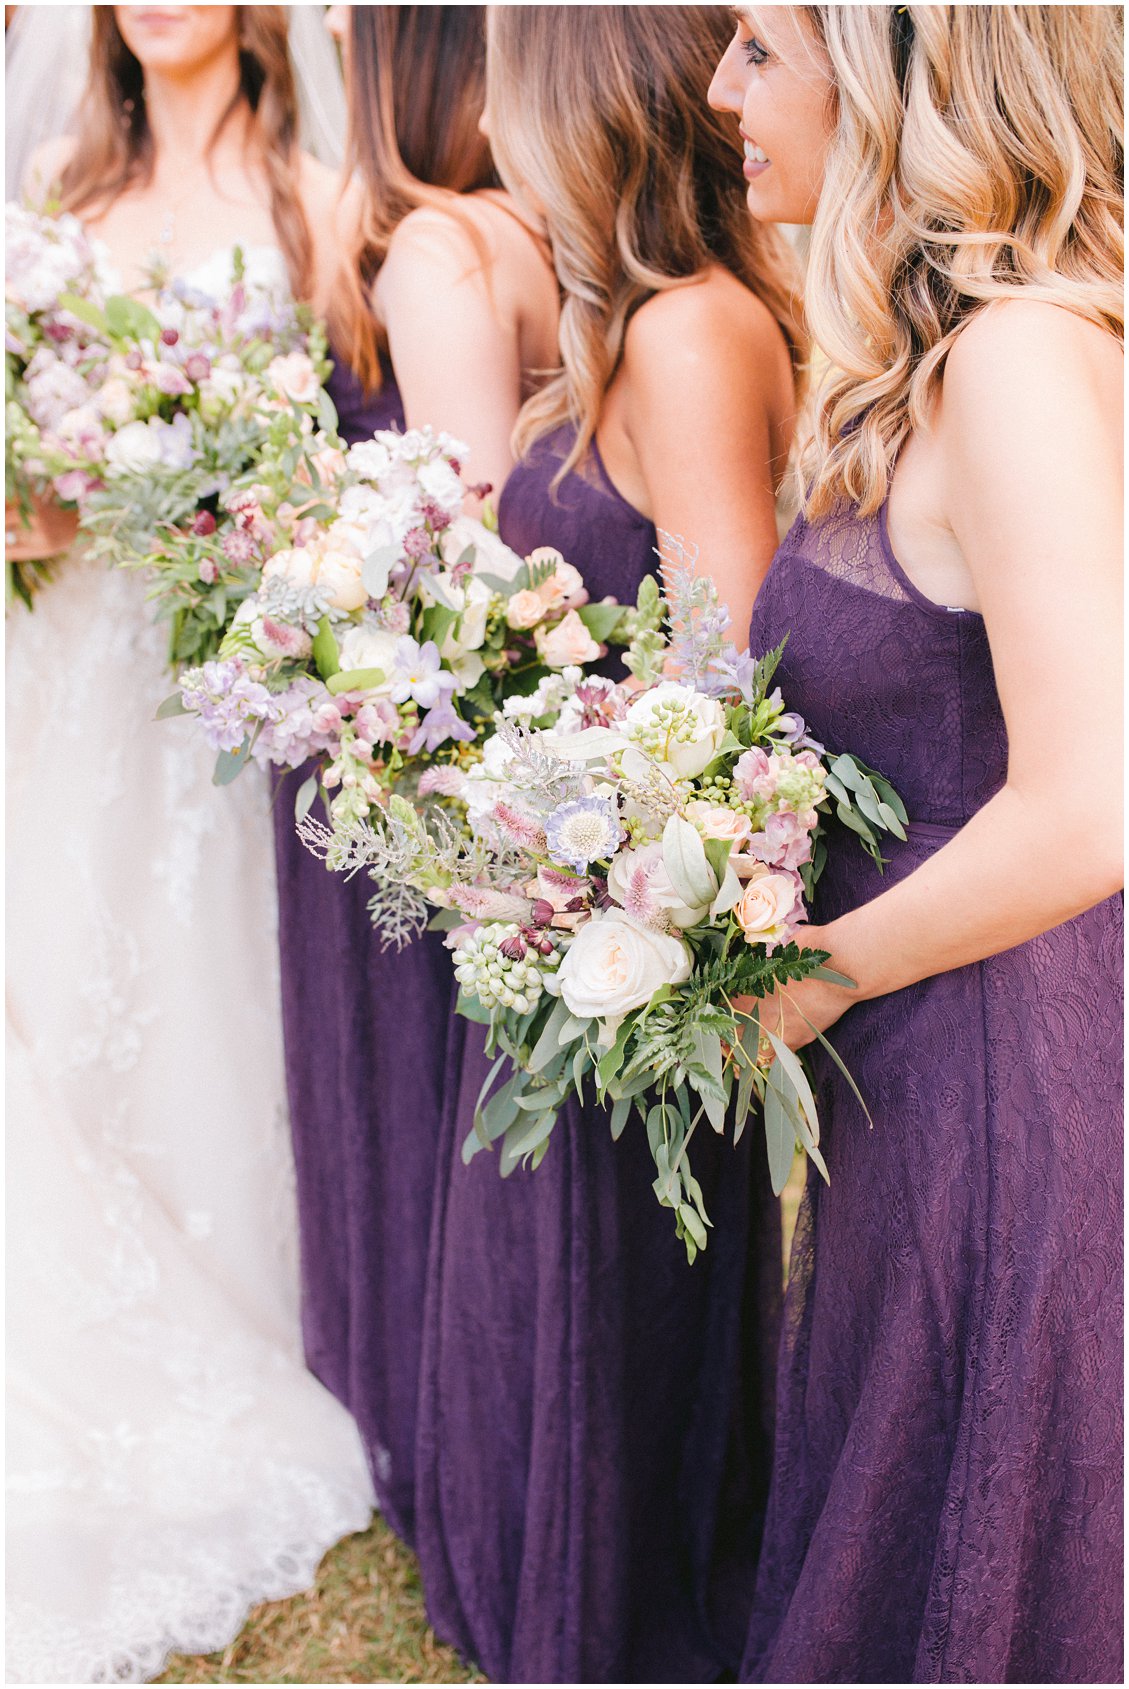 Plum bridesmaid and soft natural florals for an intimate wedding at Seven Springs Farm & Manor RVA by Pattengale